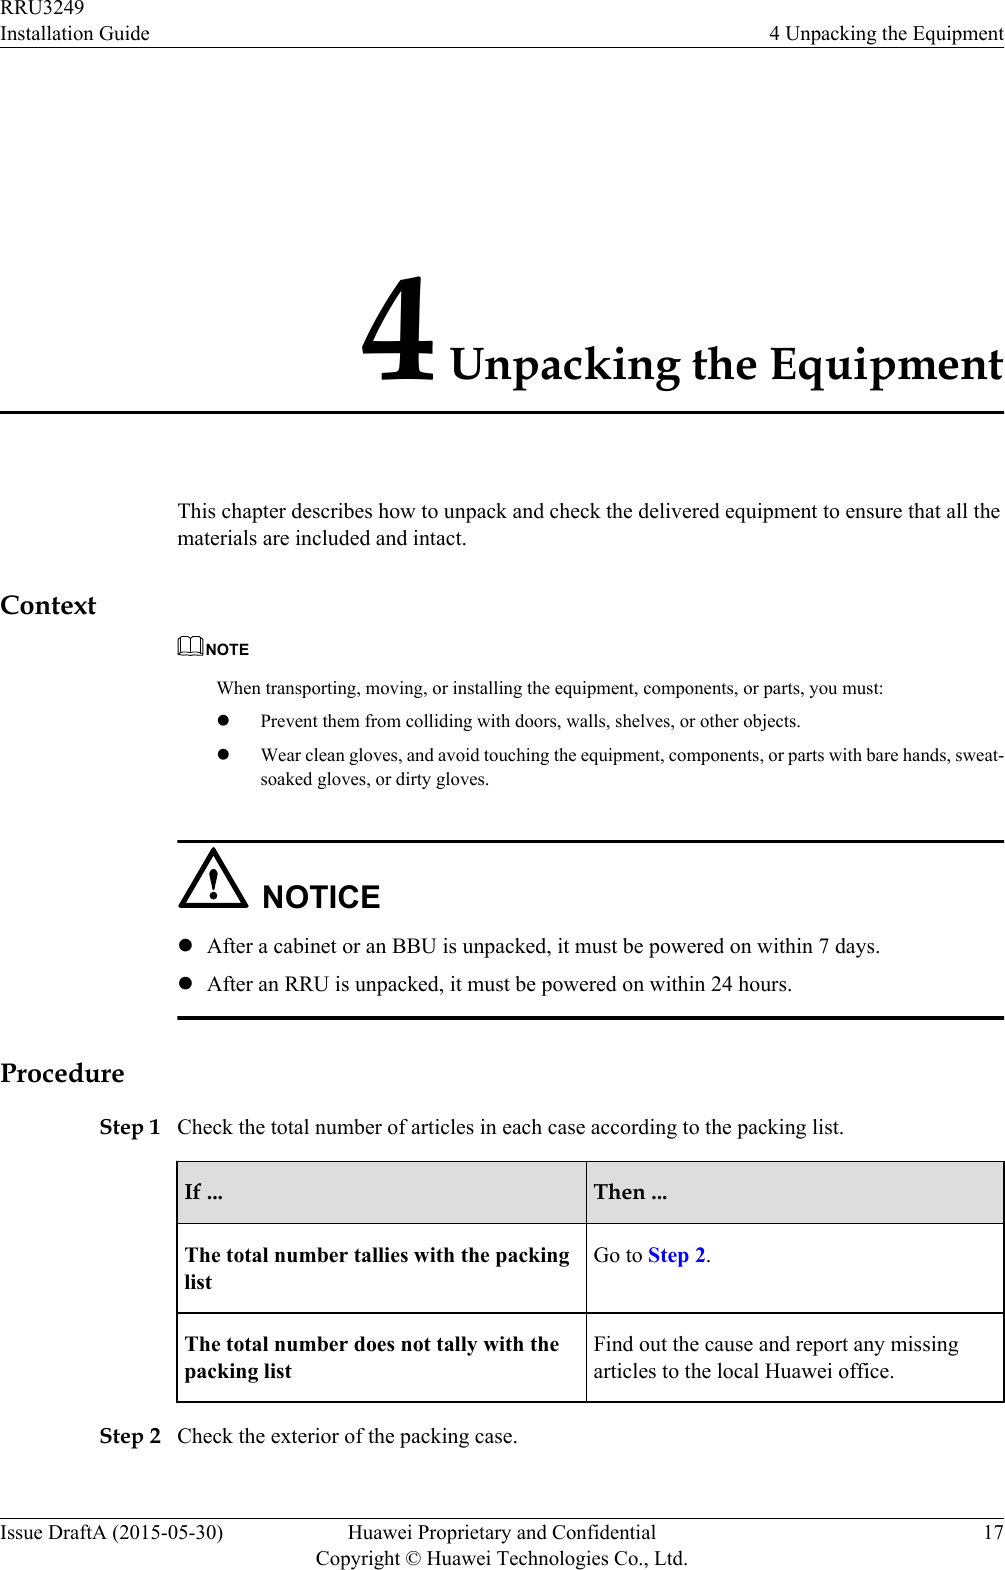 4 Unpacking the EquipmentThis chapter describes how to unpack and check the delivered equipment to ensure that all thematerials are included and intact.ContextNOTEWhen transporting, moving, or installing the equipment, components, or parts, you must:lPrevent them from colliding with doors, walls, shelves, or other objects.lWear clean gloves, and avoid touching the equipment, components, or parts with bare hands, sweat-soaked gloves, or dirty gloves.NOTICElAfter a cabinet or an BBU is unpacked, it must be powered on within 7 days.lAfter an RRU is unpacked, it must be powered on within 24 hours.ProcedureStep 1 Check the total number of articles in each case according to the packing list.If ... Then ...The total number tallies with the packinglistGo to Step 2.The total number does not tally with thepacking listFind out the cause and report any missingarticles to the local Huawei office.Step 2 Check the exterior of the packing case.RRU3249Installation Guide 4 Unpacking the EquipmentIssue DraftA (2015-05-30) Huawei Proprietary and ConfidentialCopyright © Huawei Technologies Co., Ltd.17